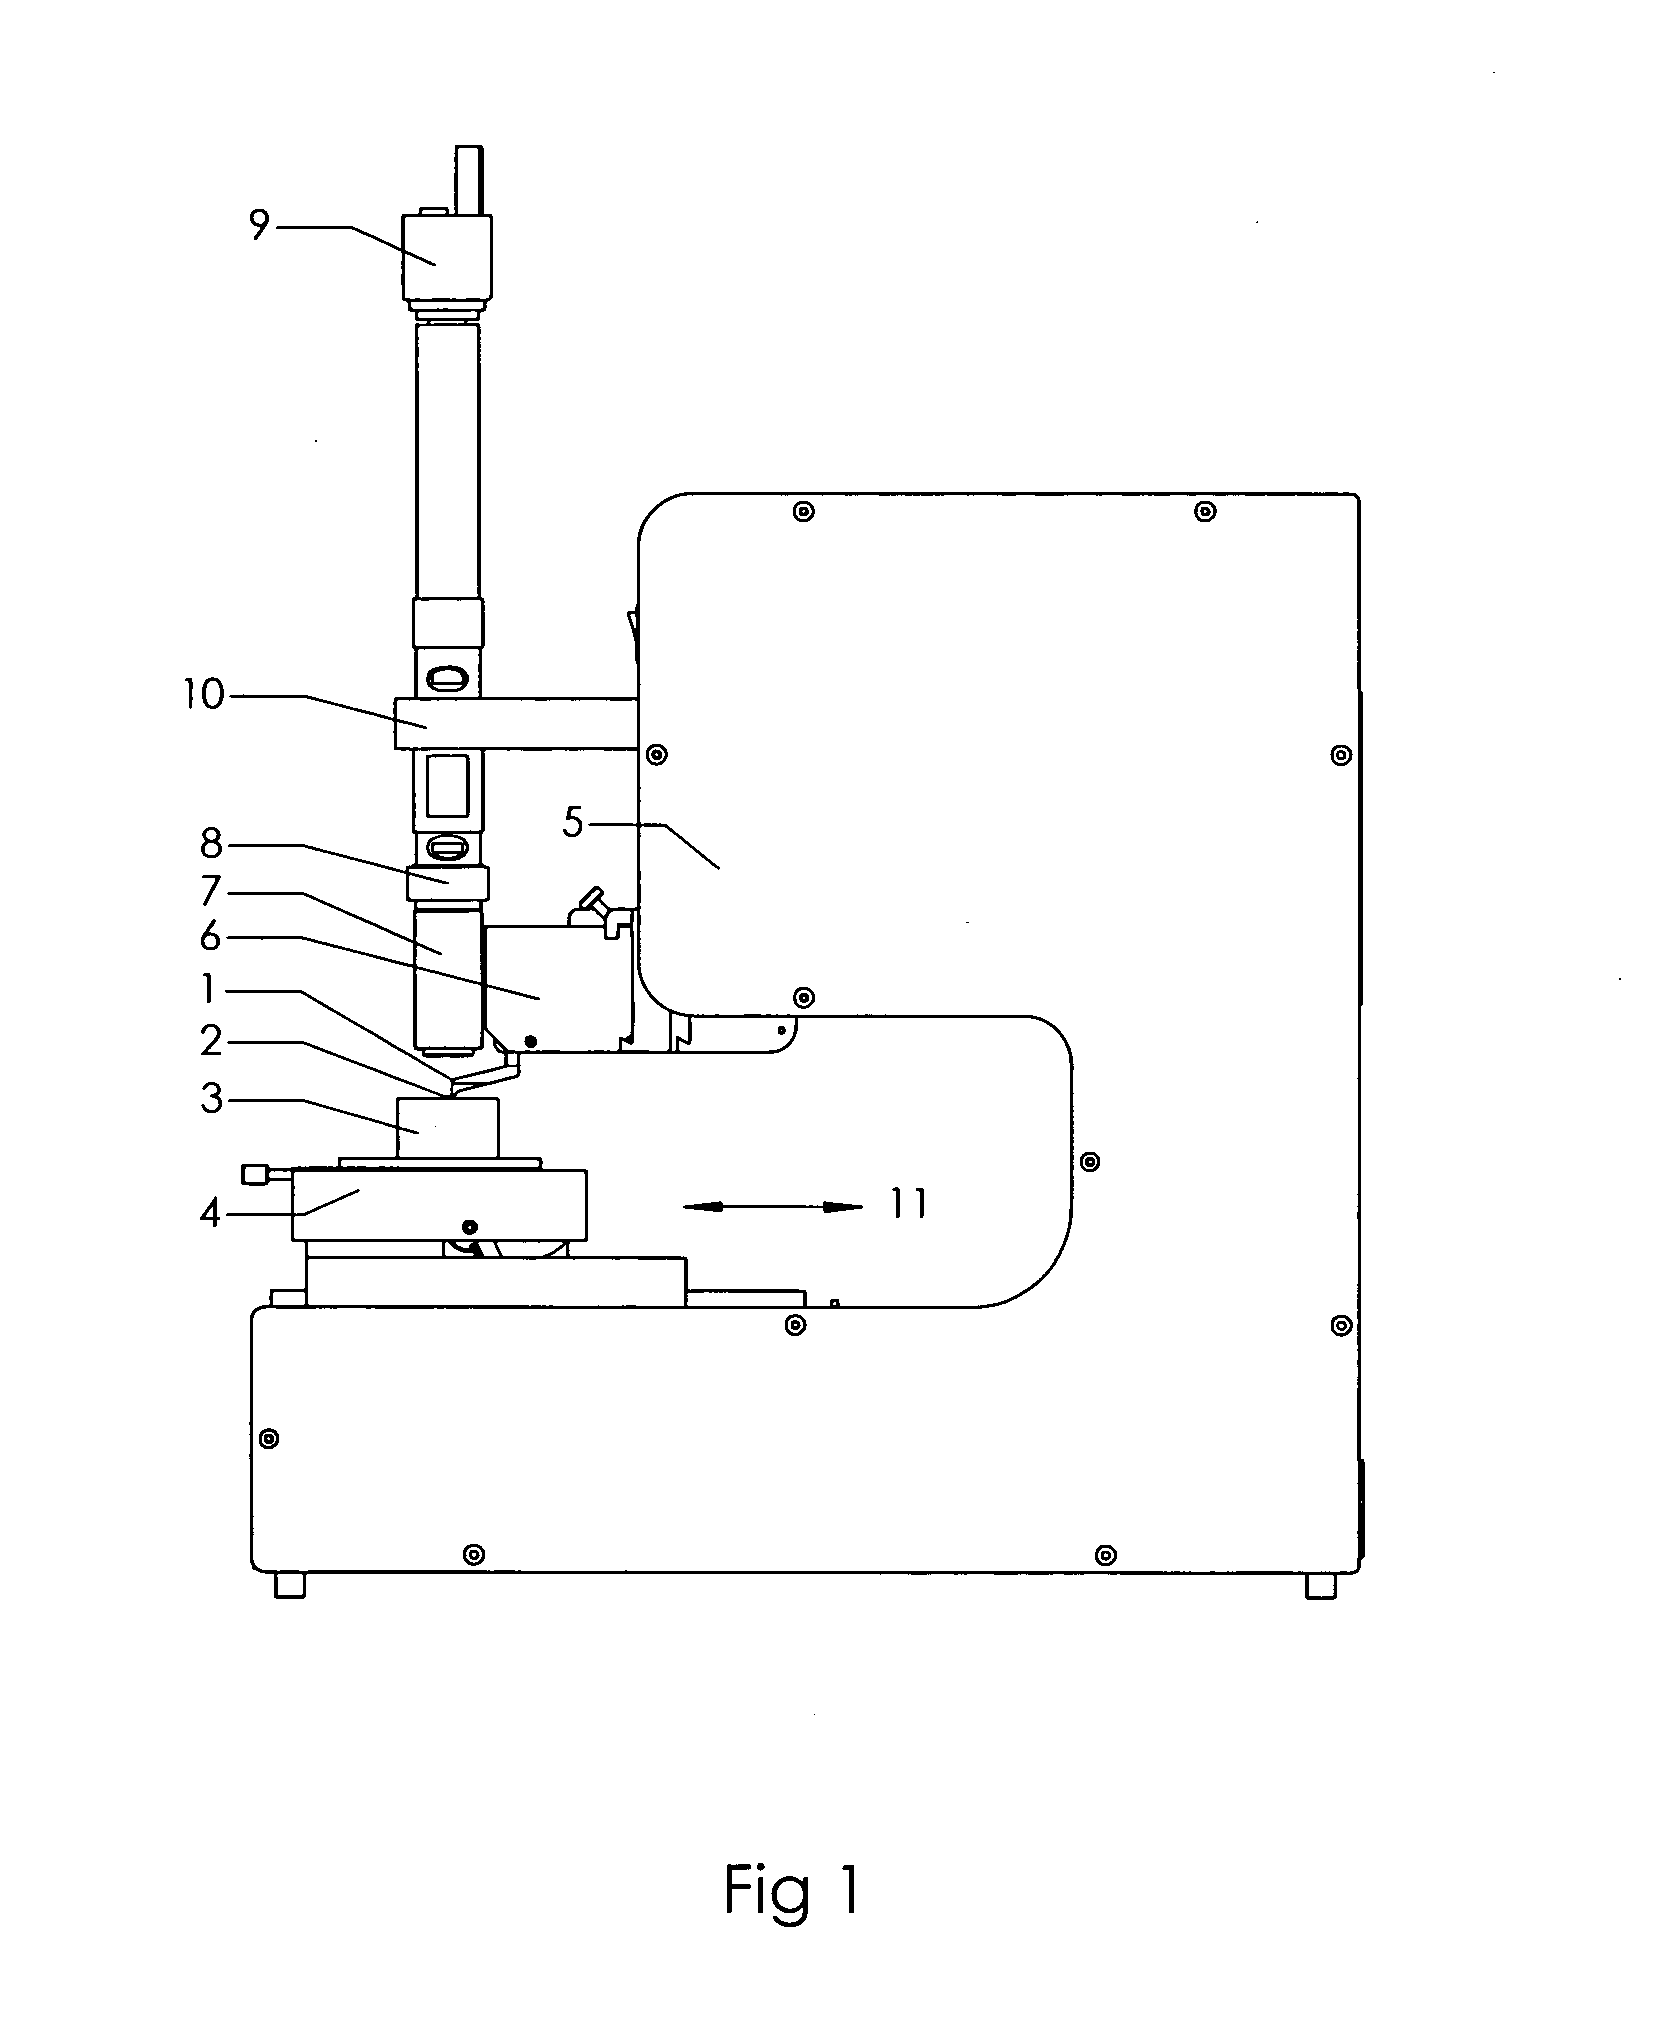 Bond test systems with offset shear tool